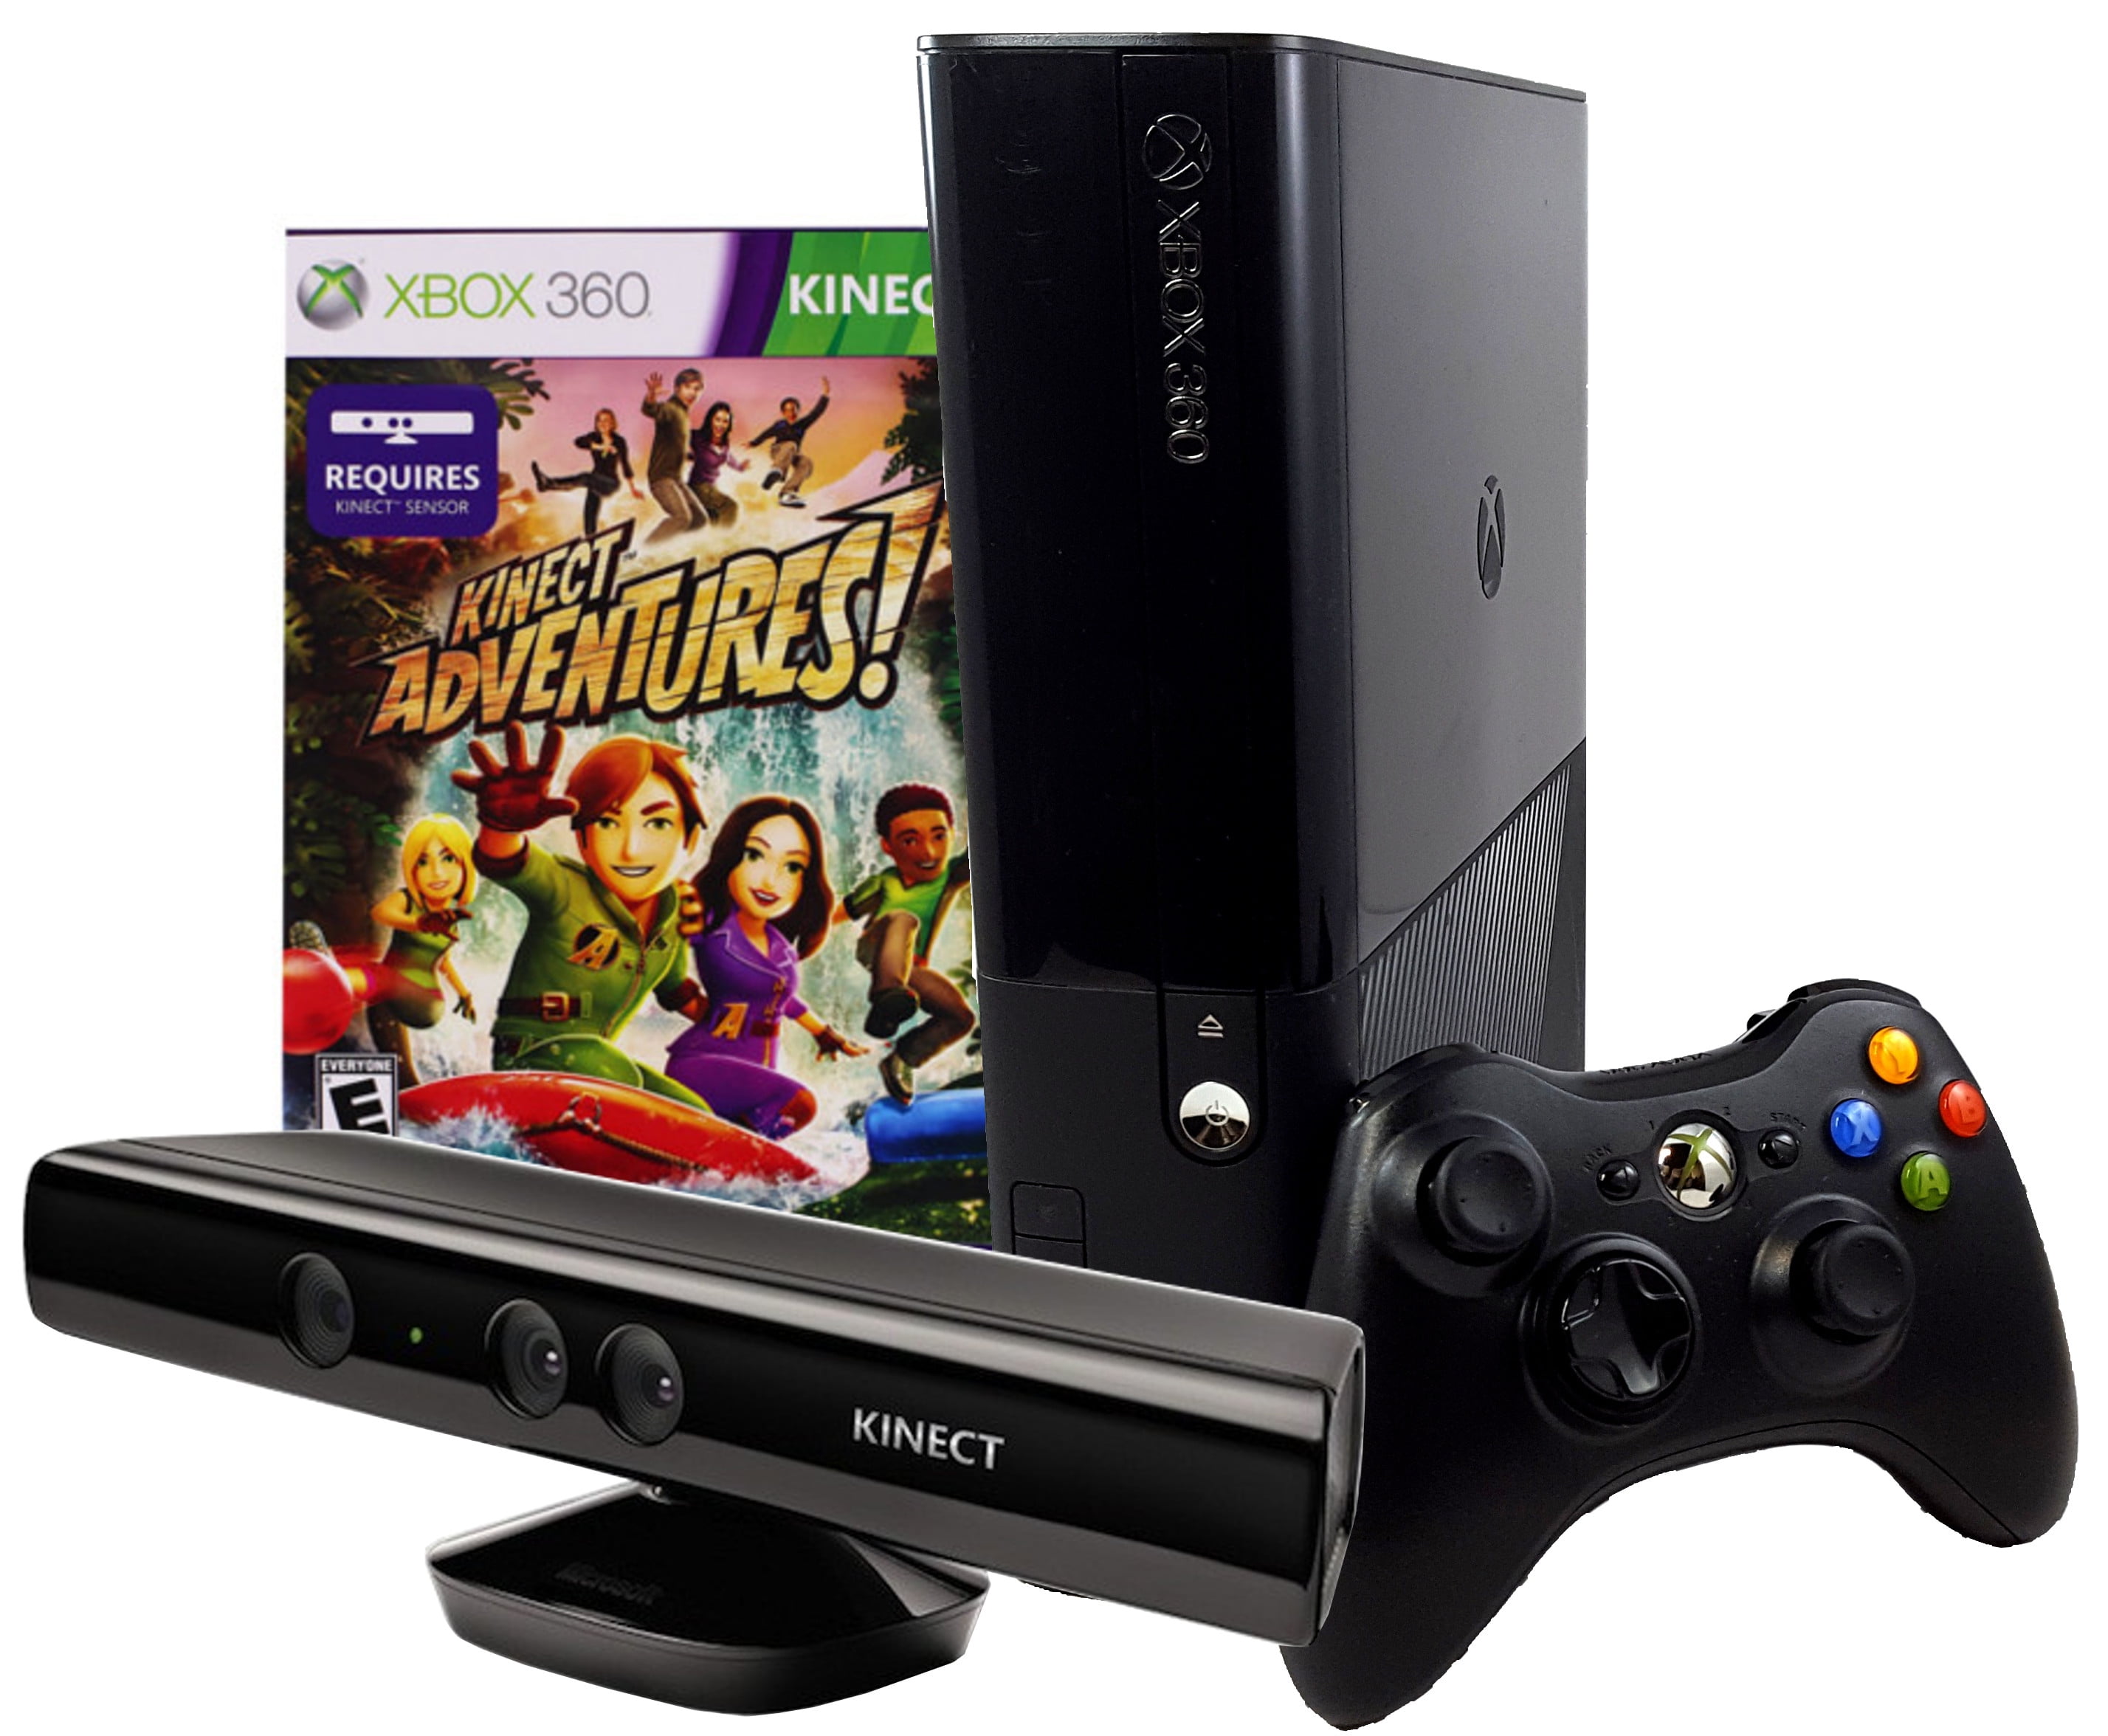 Restored Microsoft Xbox 360 E Slim 4GB Console with Kinect Sensor and  Kinect Adventures (Refurbished)